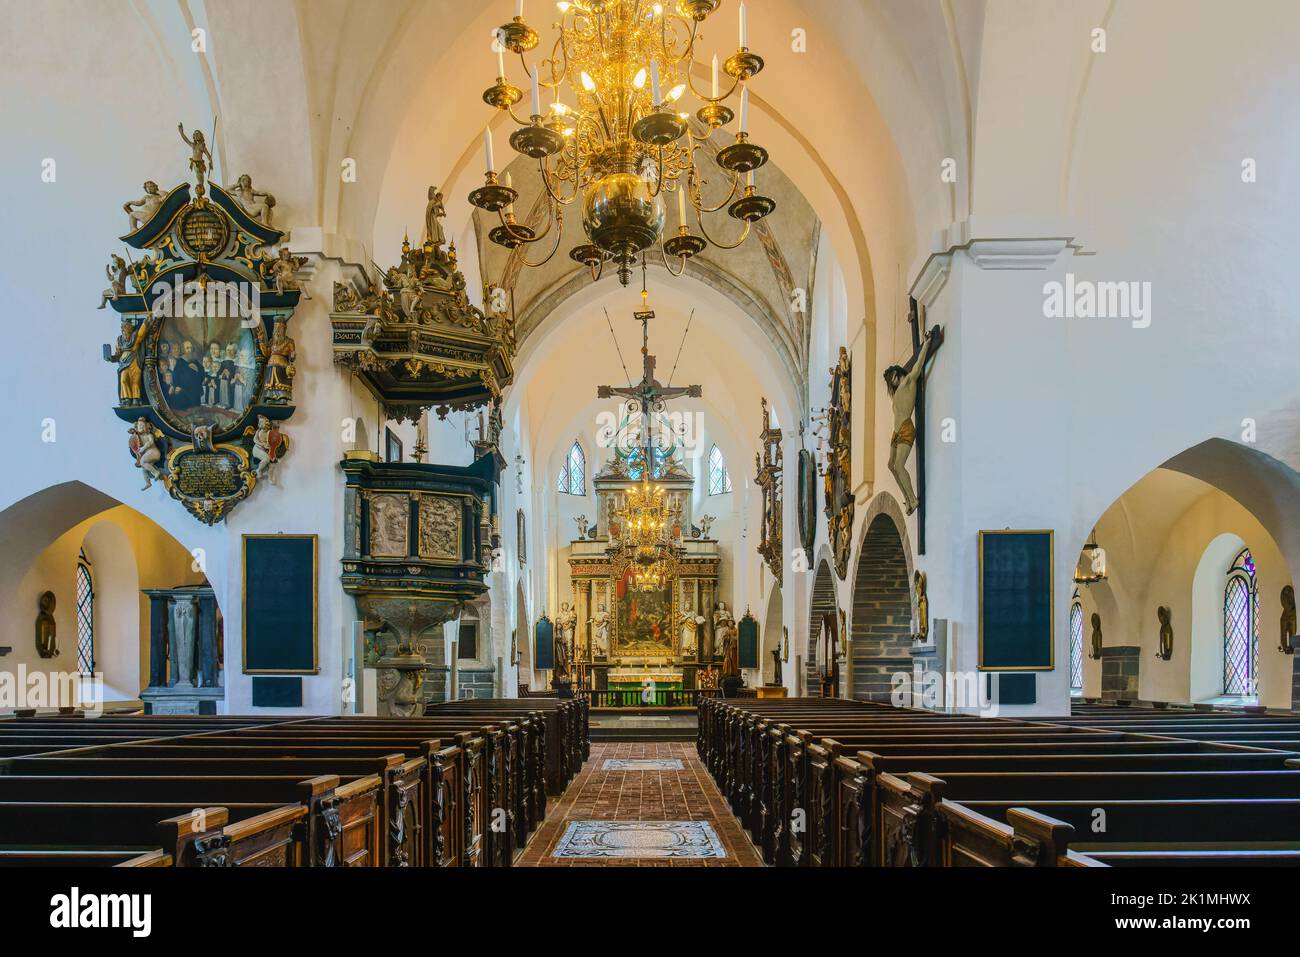 Ystad, Sweden - 13 Sep, 2022: Interior and altar of the church wich was buildt in the twelve hundres. Stock Photo